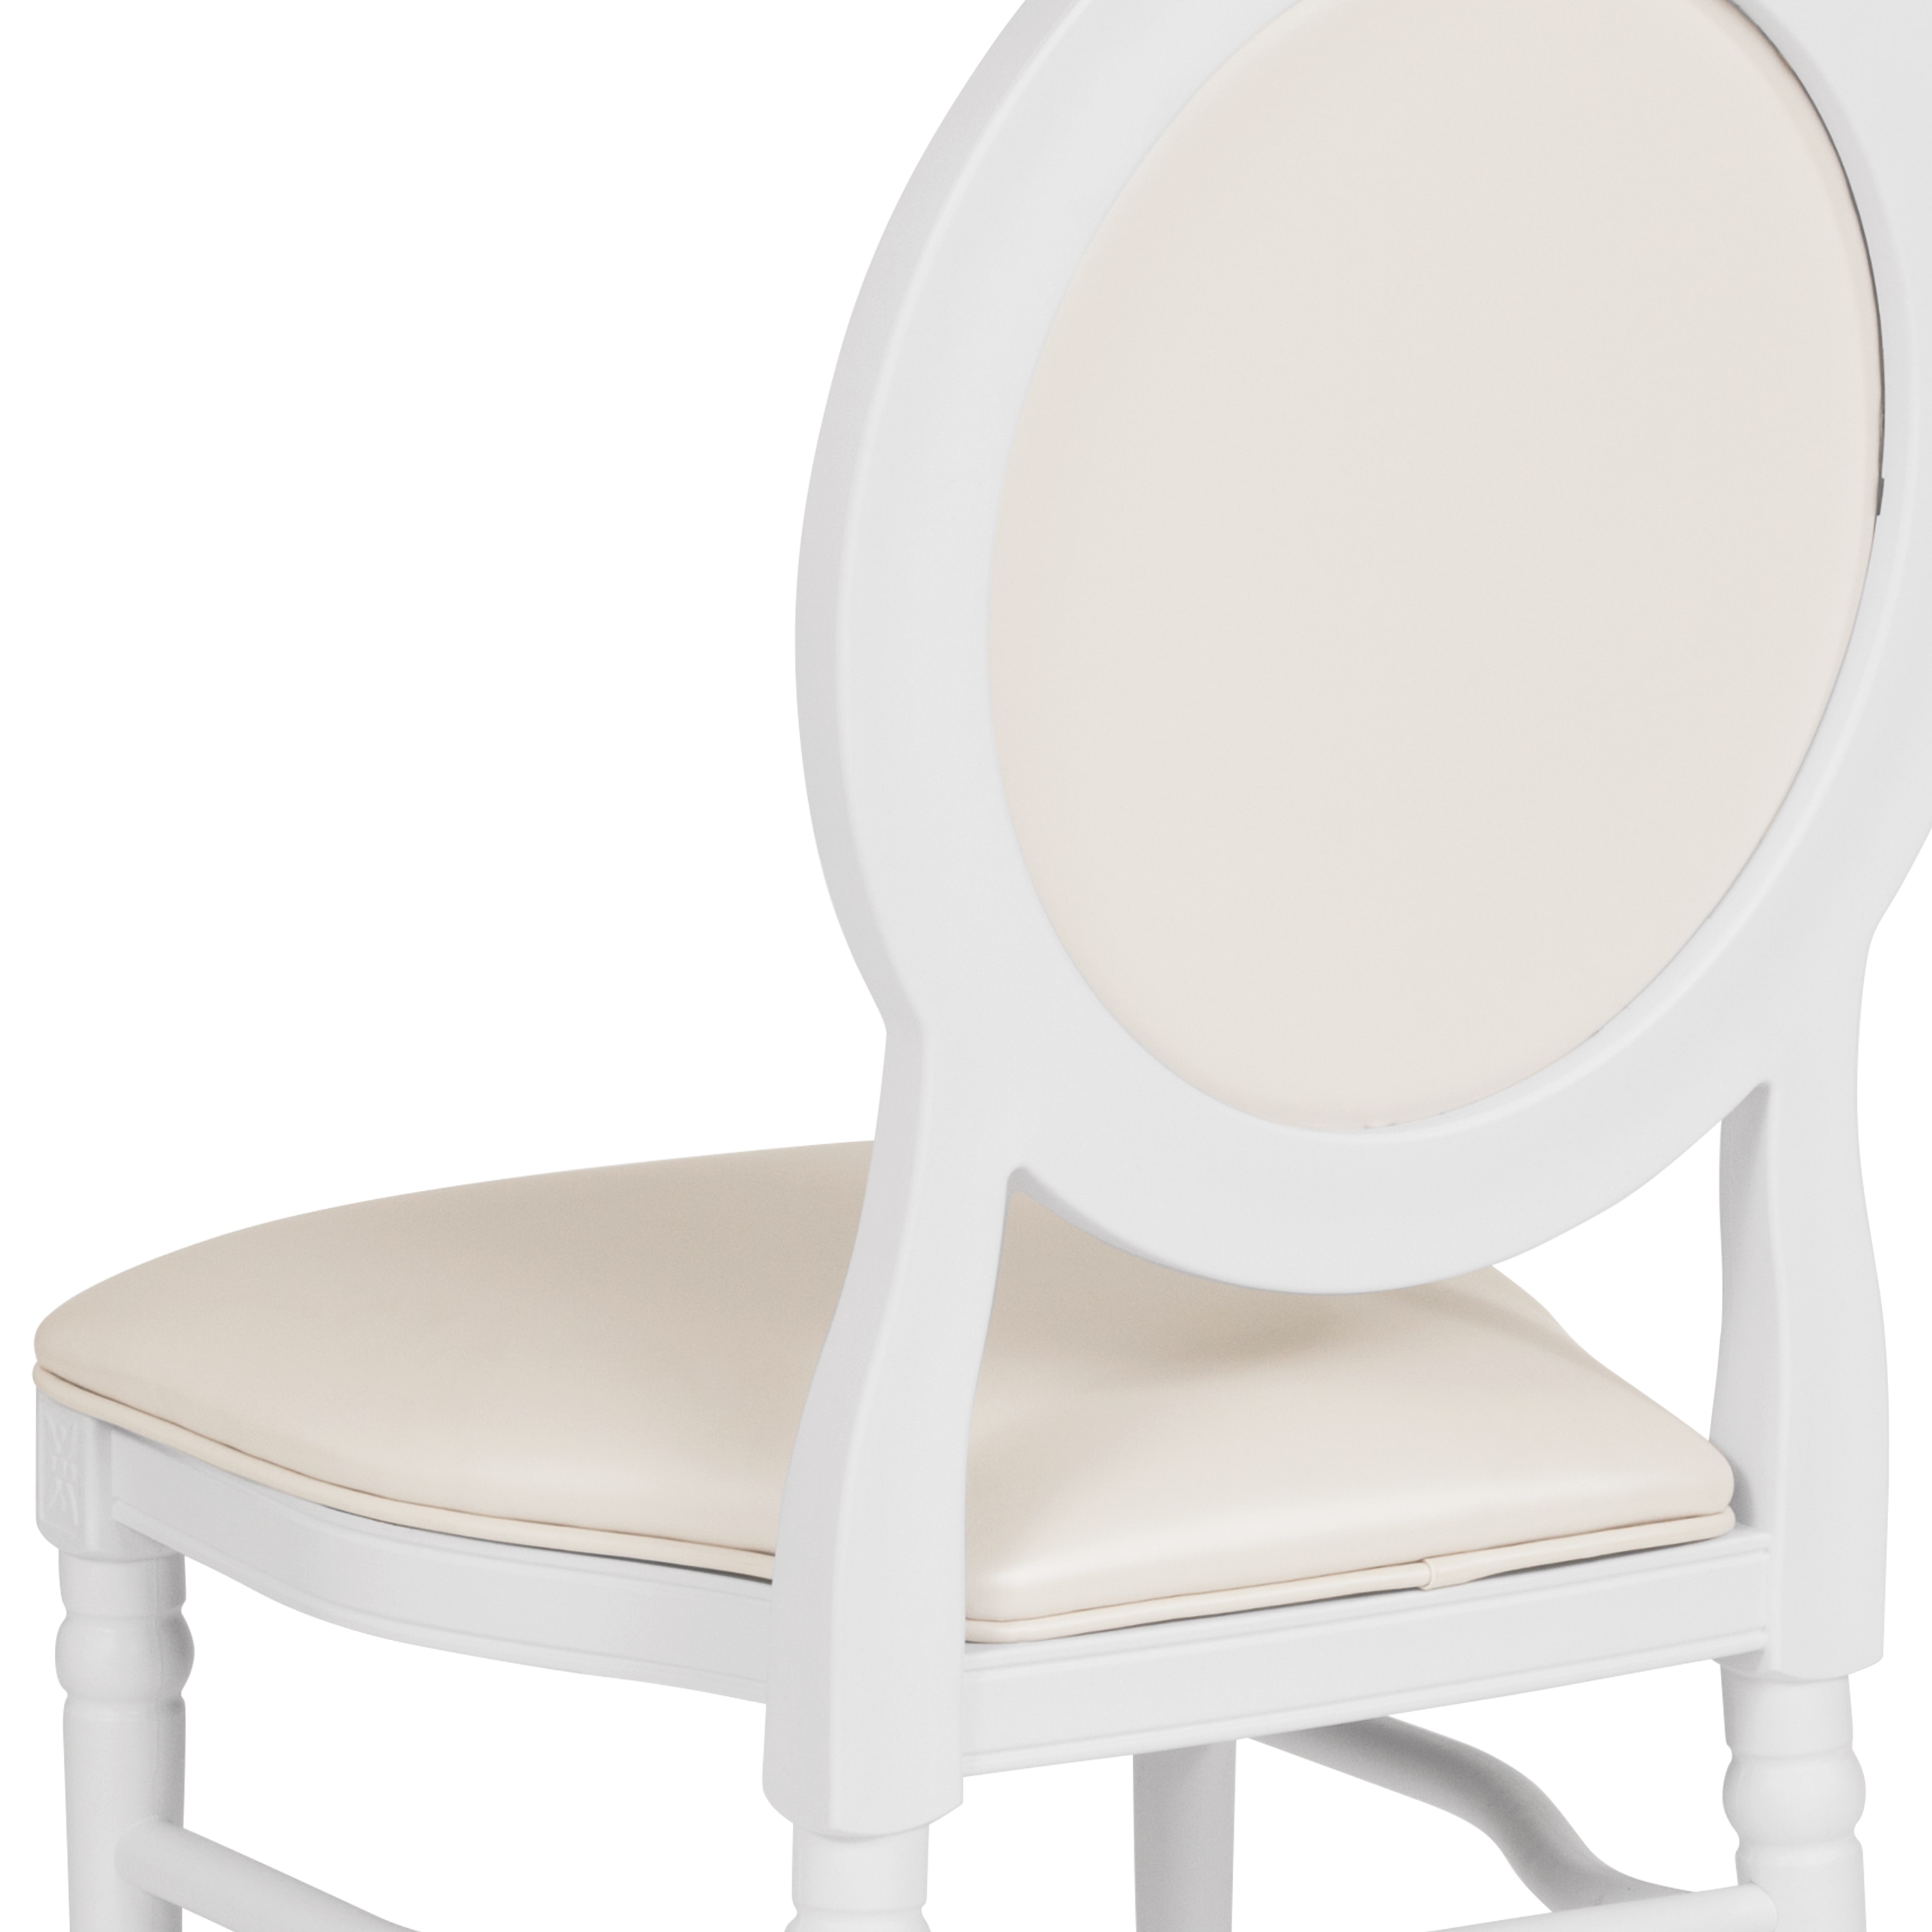  Flash Furniture HERCULES Series 900 lb. Capacity King Louis  Chair with White Vinyl Back and Seat and White Frame - Chairs